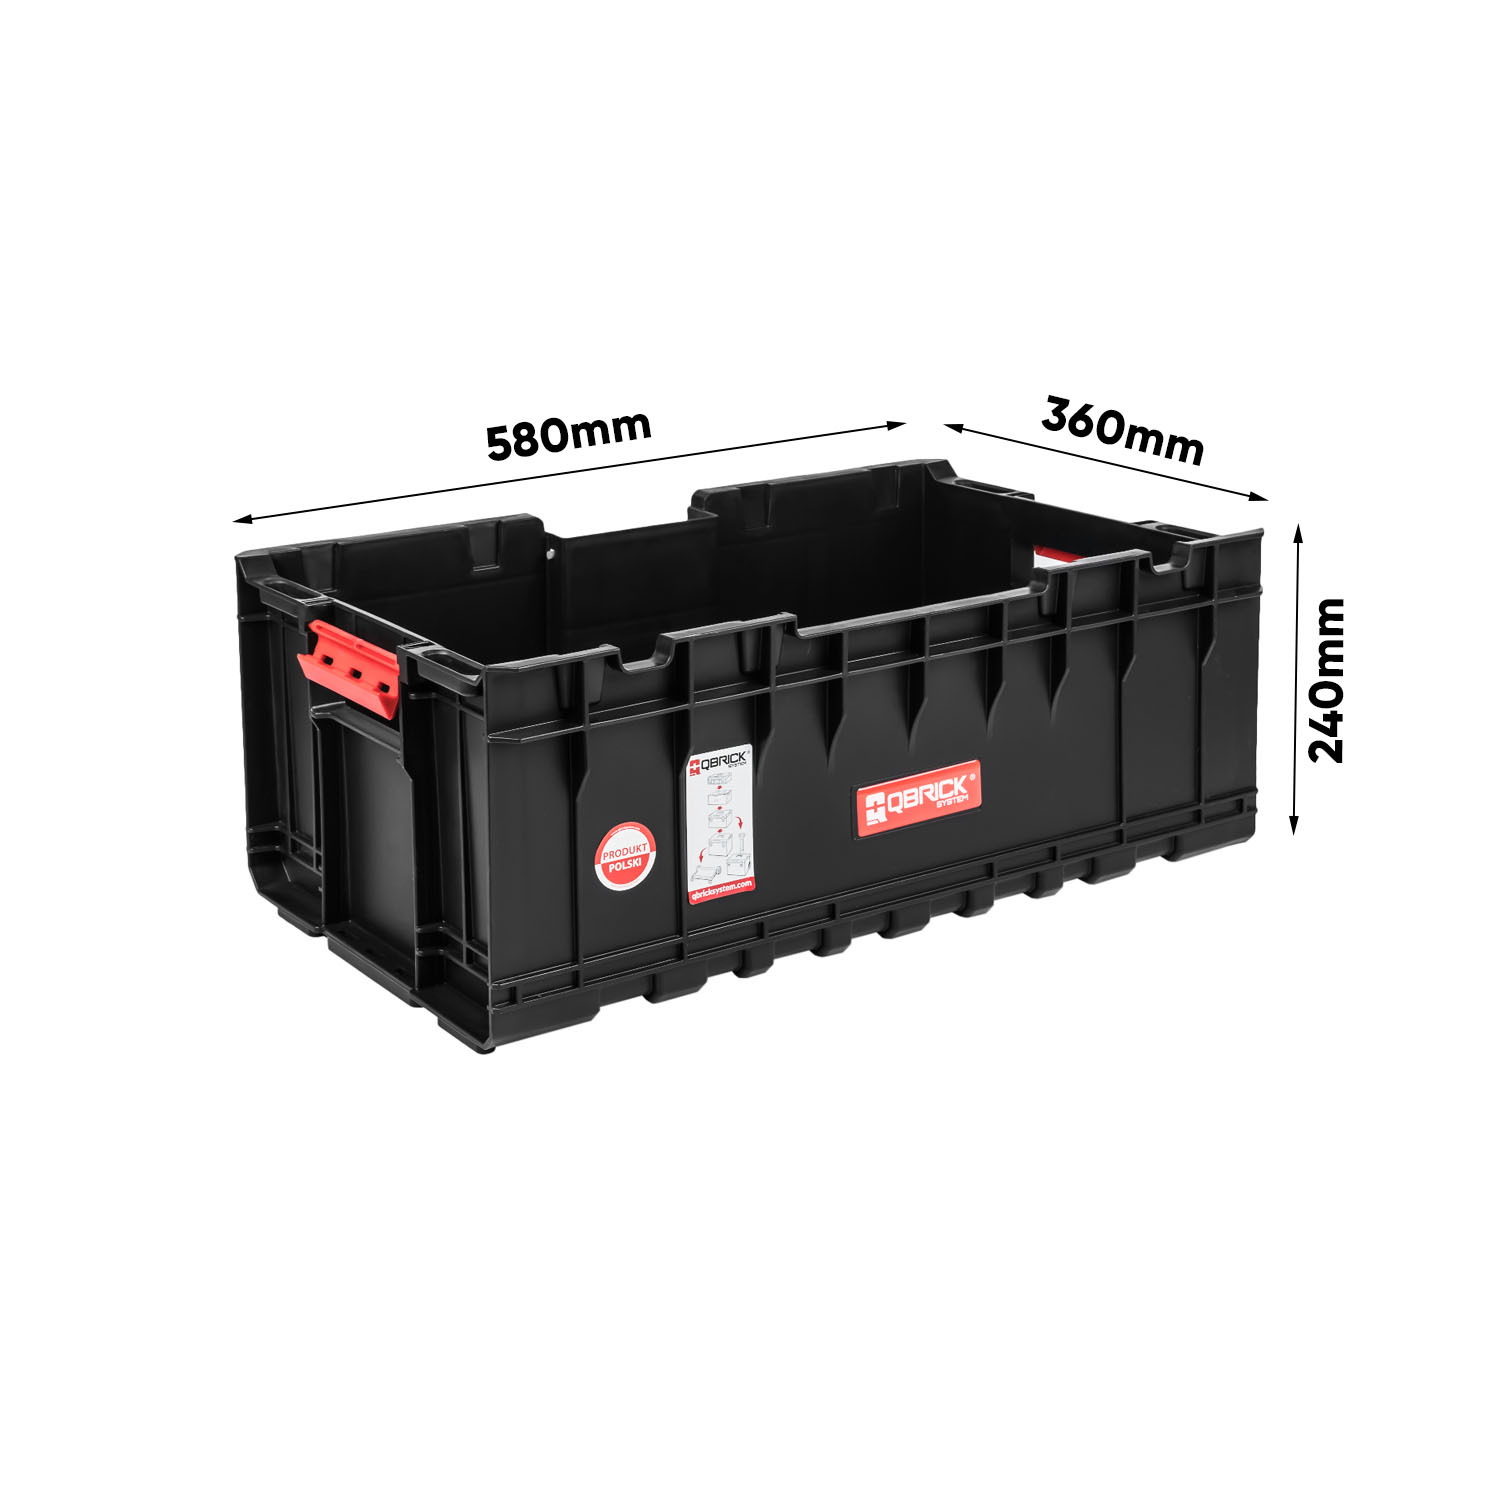 Wymiary Workshop container QS One Box Plus (1)